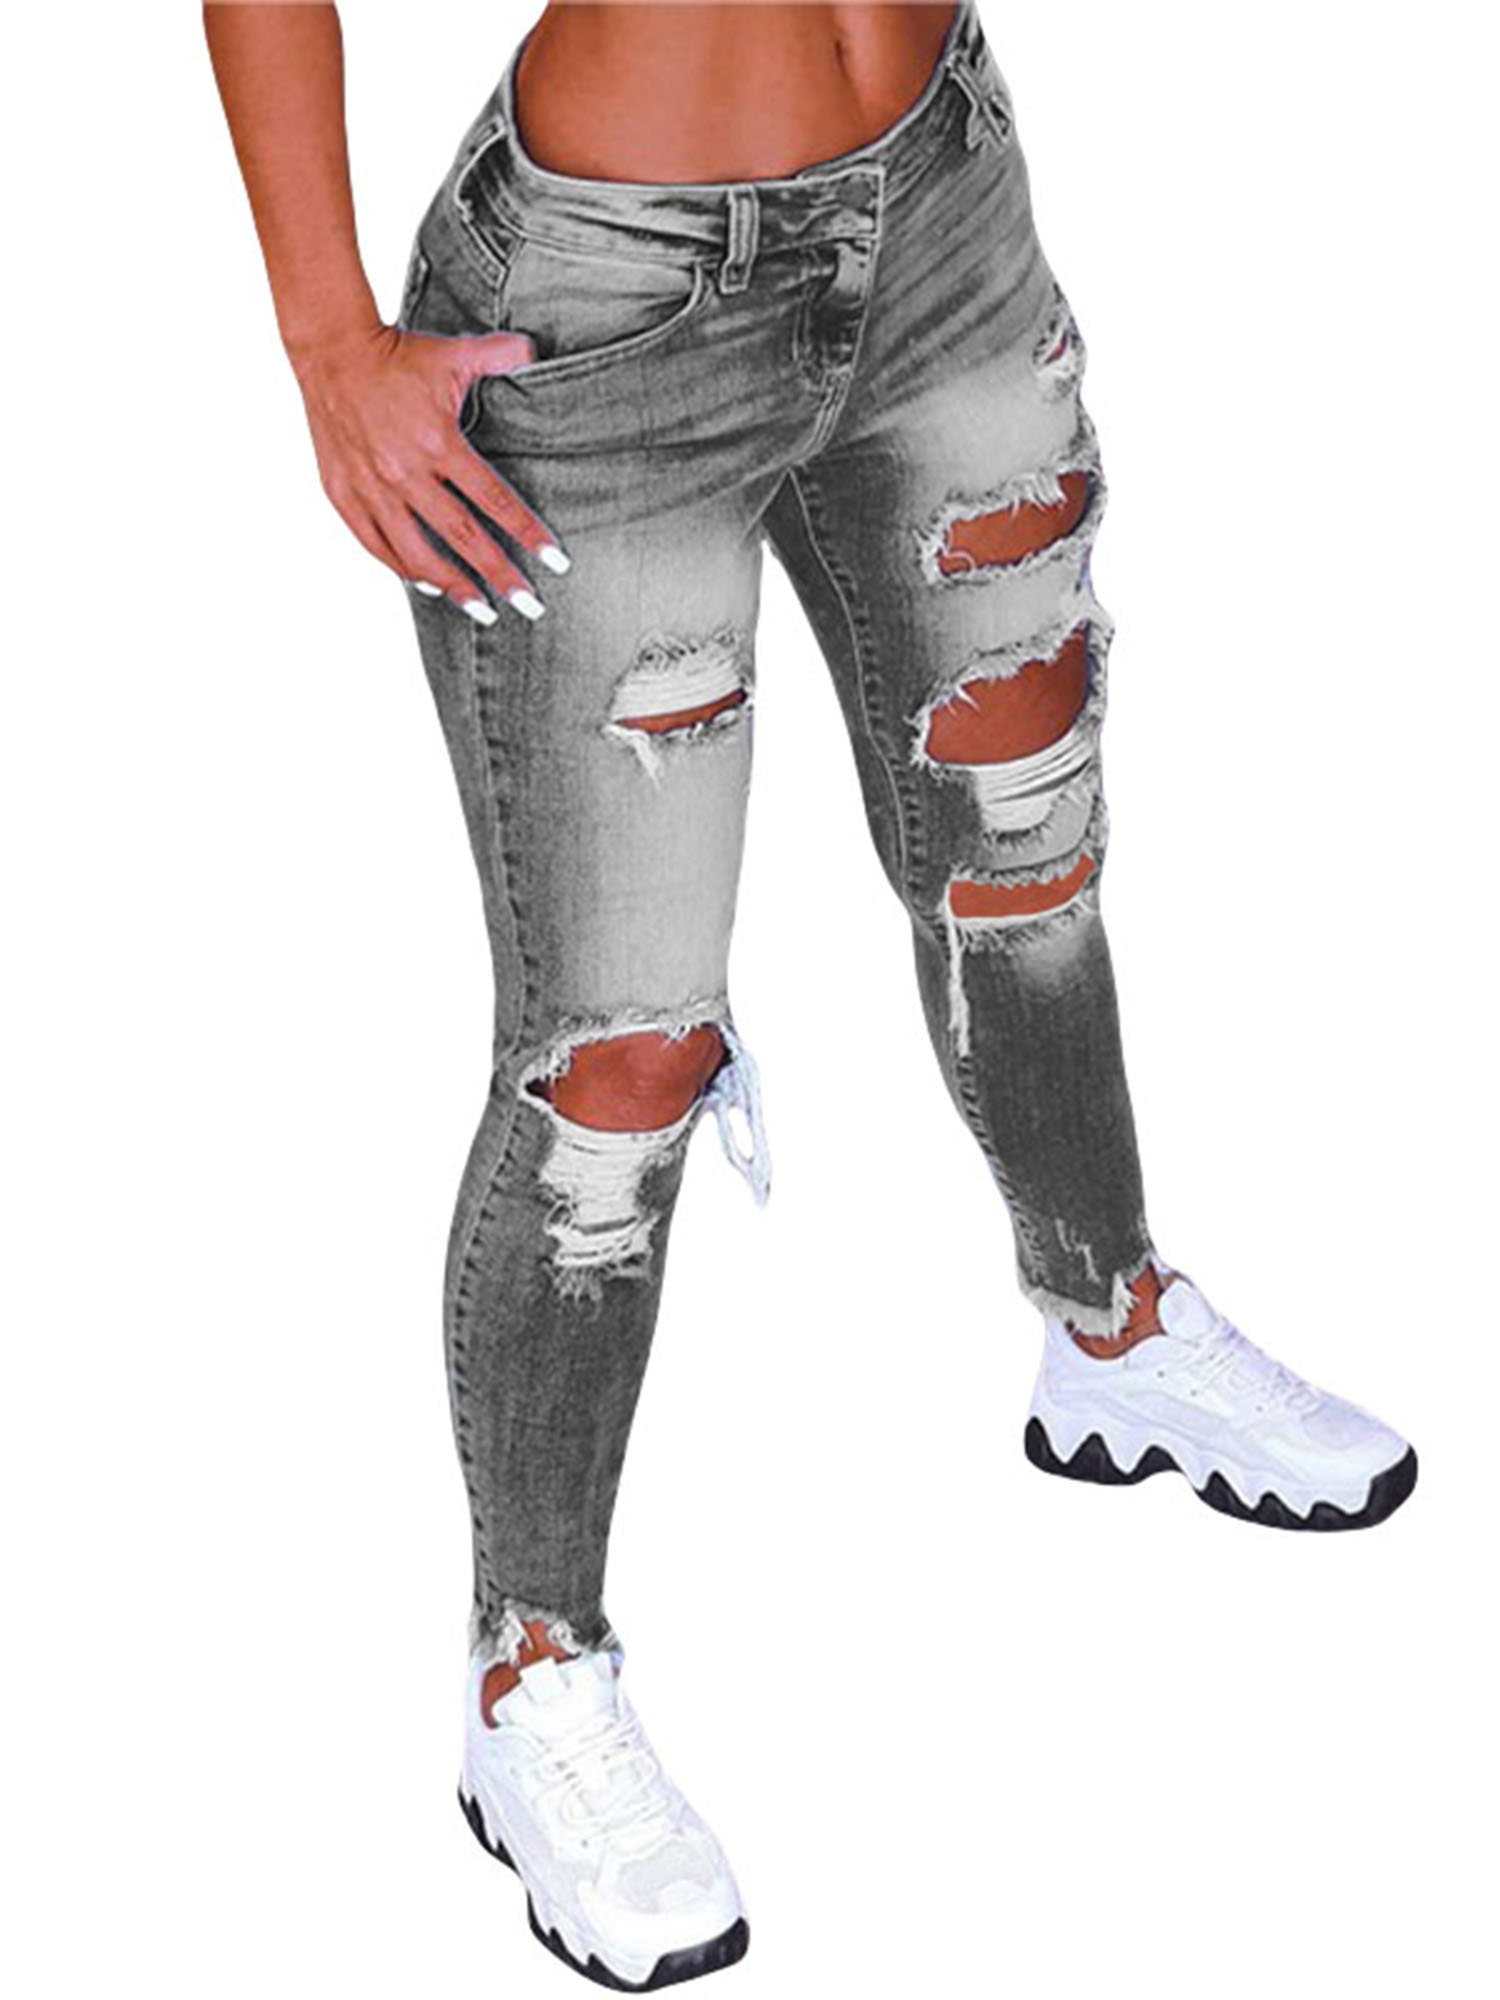 UKAP Women Stretch Ripped Skinny Butt Lift Jeans Casual Distressed Denim Pants - image 1 of 2